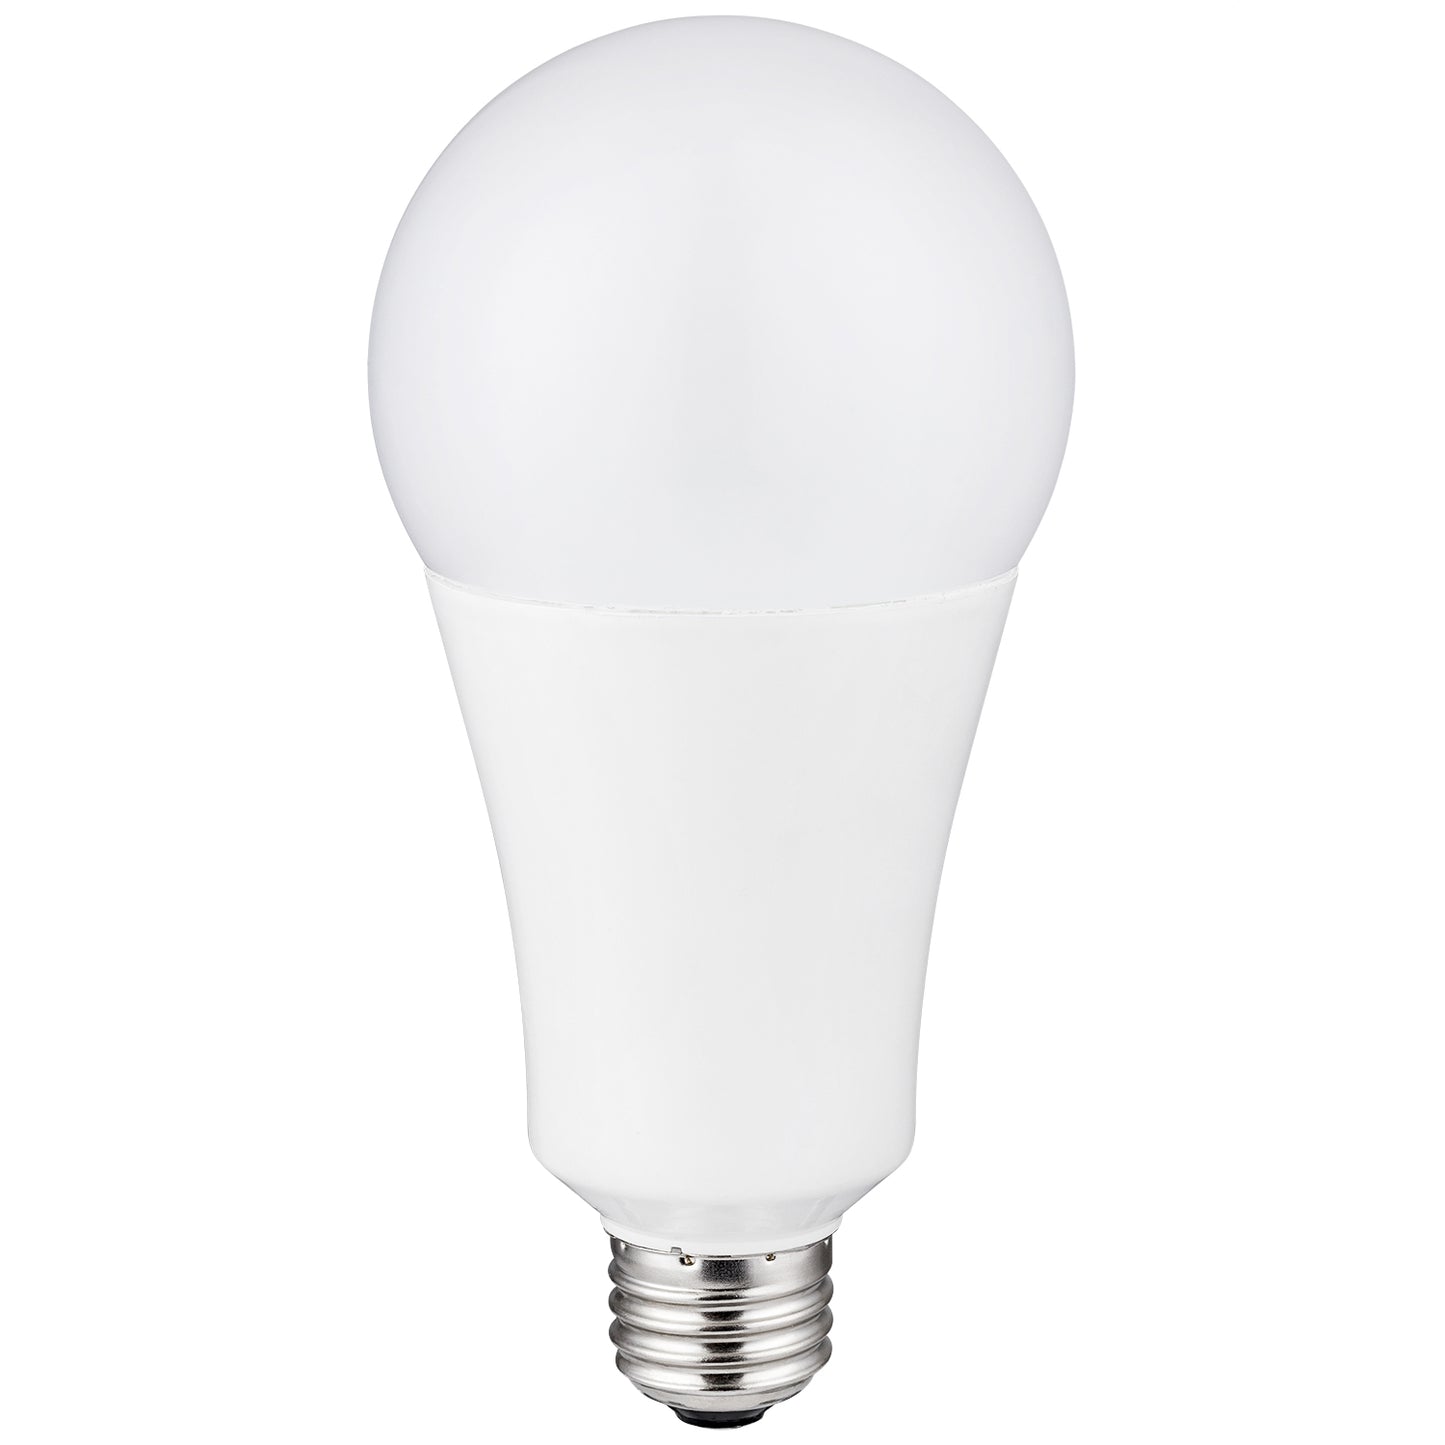 Sunlite 82109 LED A23 Light Bulb, 26 Watts (300w Equivalent), High Output, 4000 Lumens, Medium E26 Base, 120-227 Multi-Volt, Non-Dimmable, UL Listed, 4000K Cool White